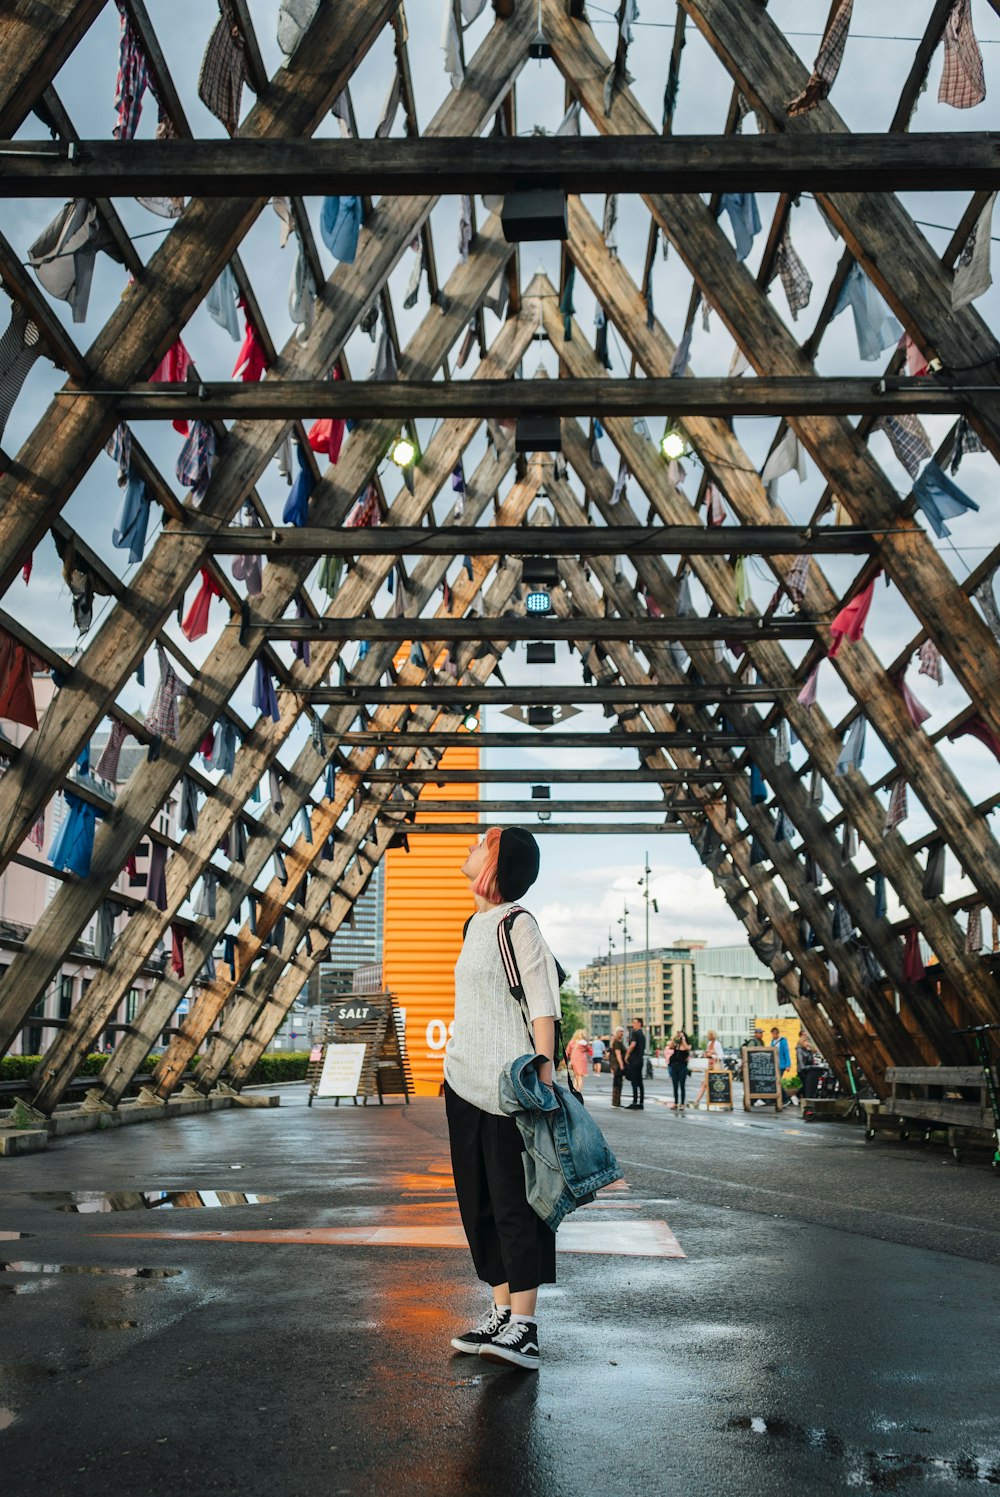 a person standing under a wooden structure in the rain